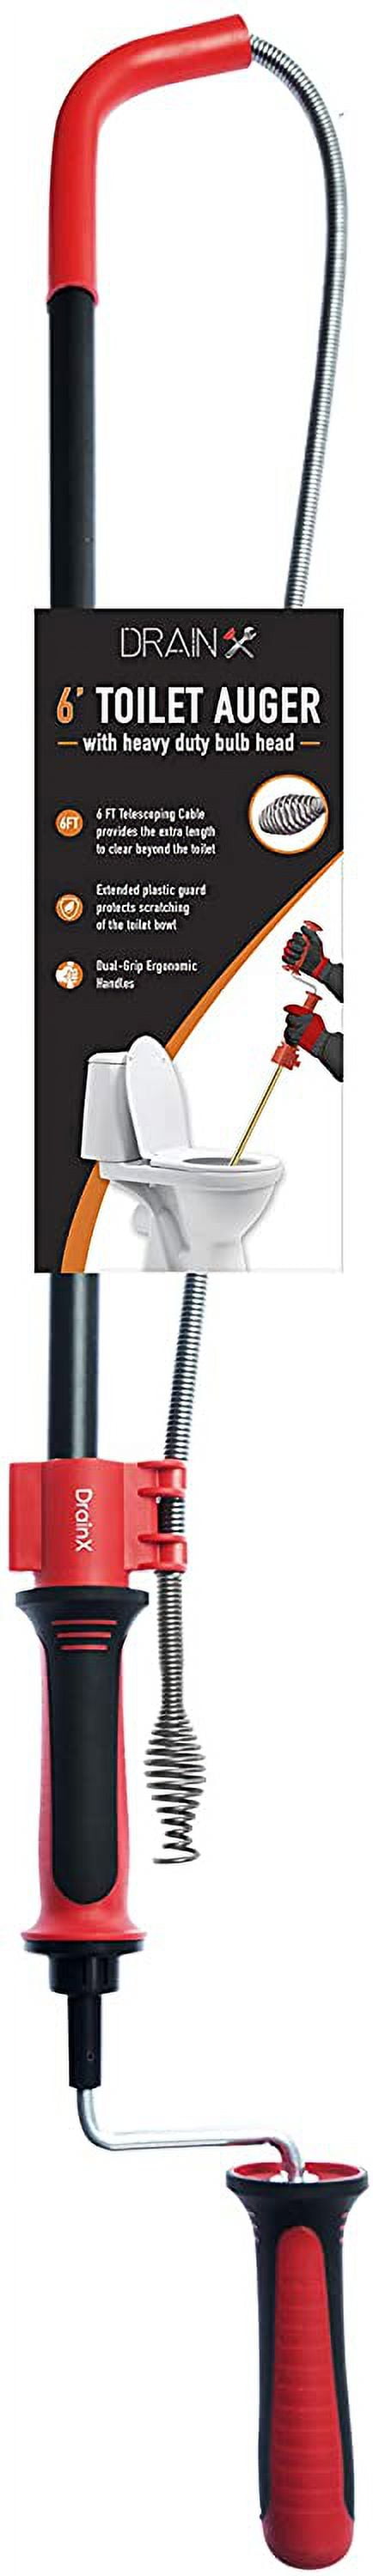 DrainX Toilet Auger Drophead Drain Snake with Drill Attachment, 6